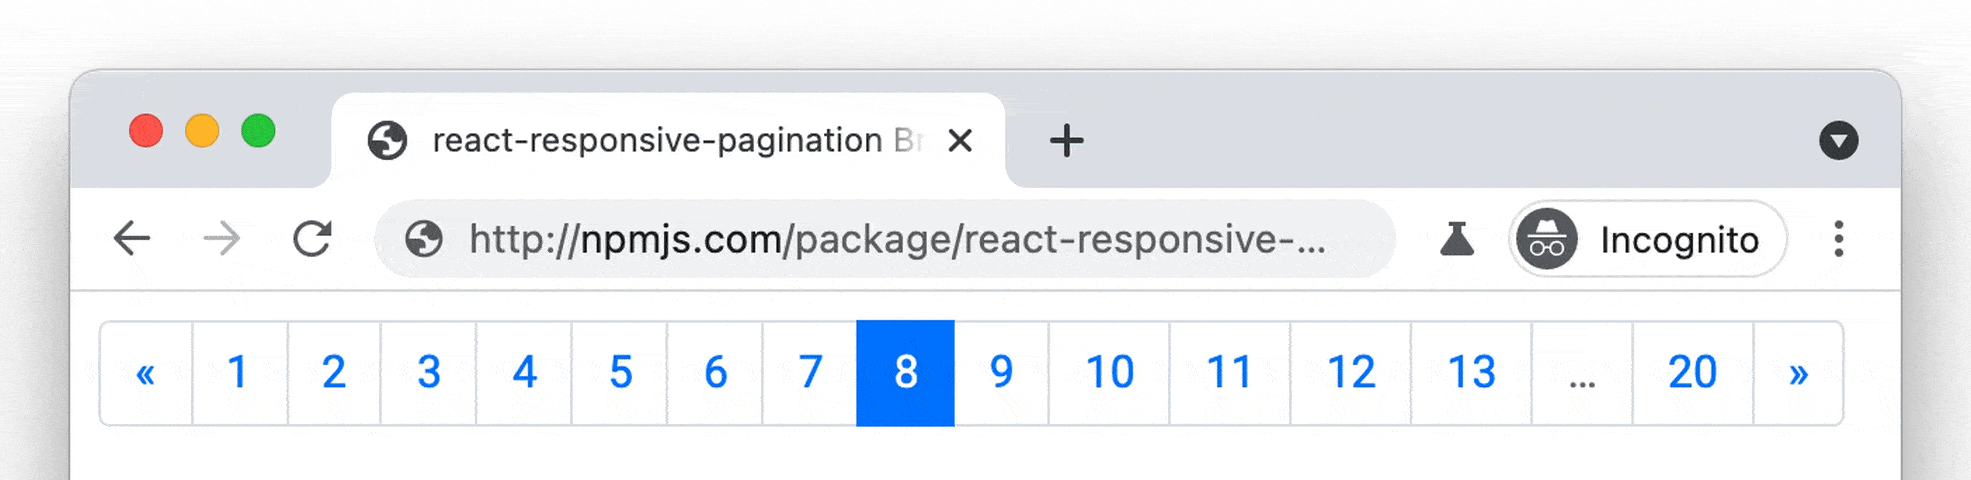 react-responsive-pagination example